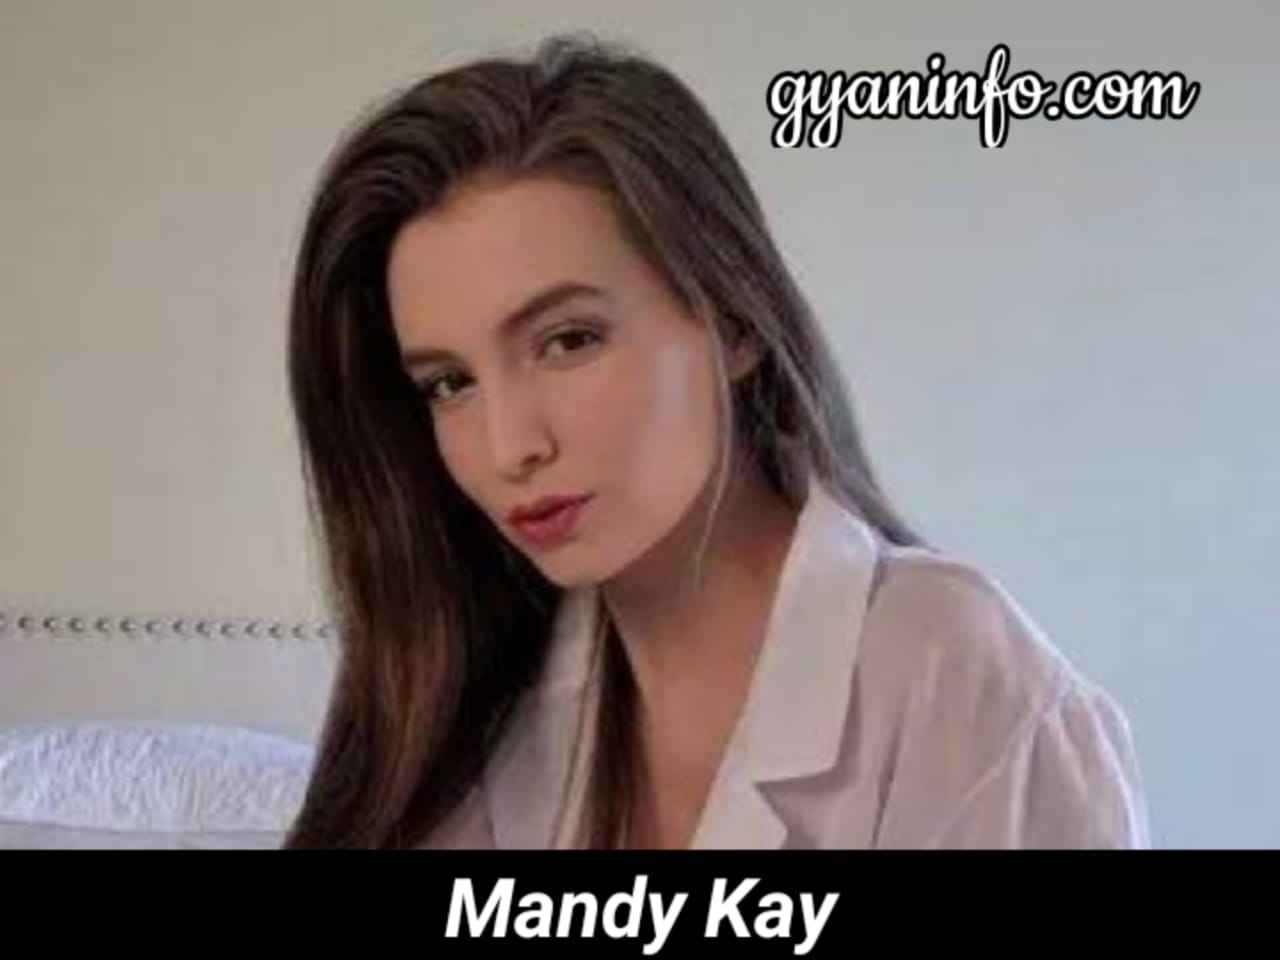 Mandy Kay Biography, Height, Age, Weight, Body Measurements, Relationship, Career, Boyfriend, Net Worth, Wiki & More